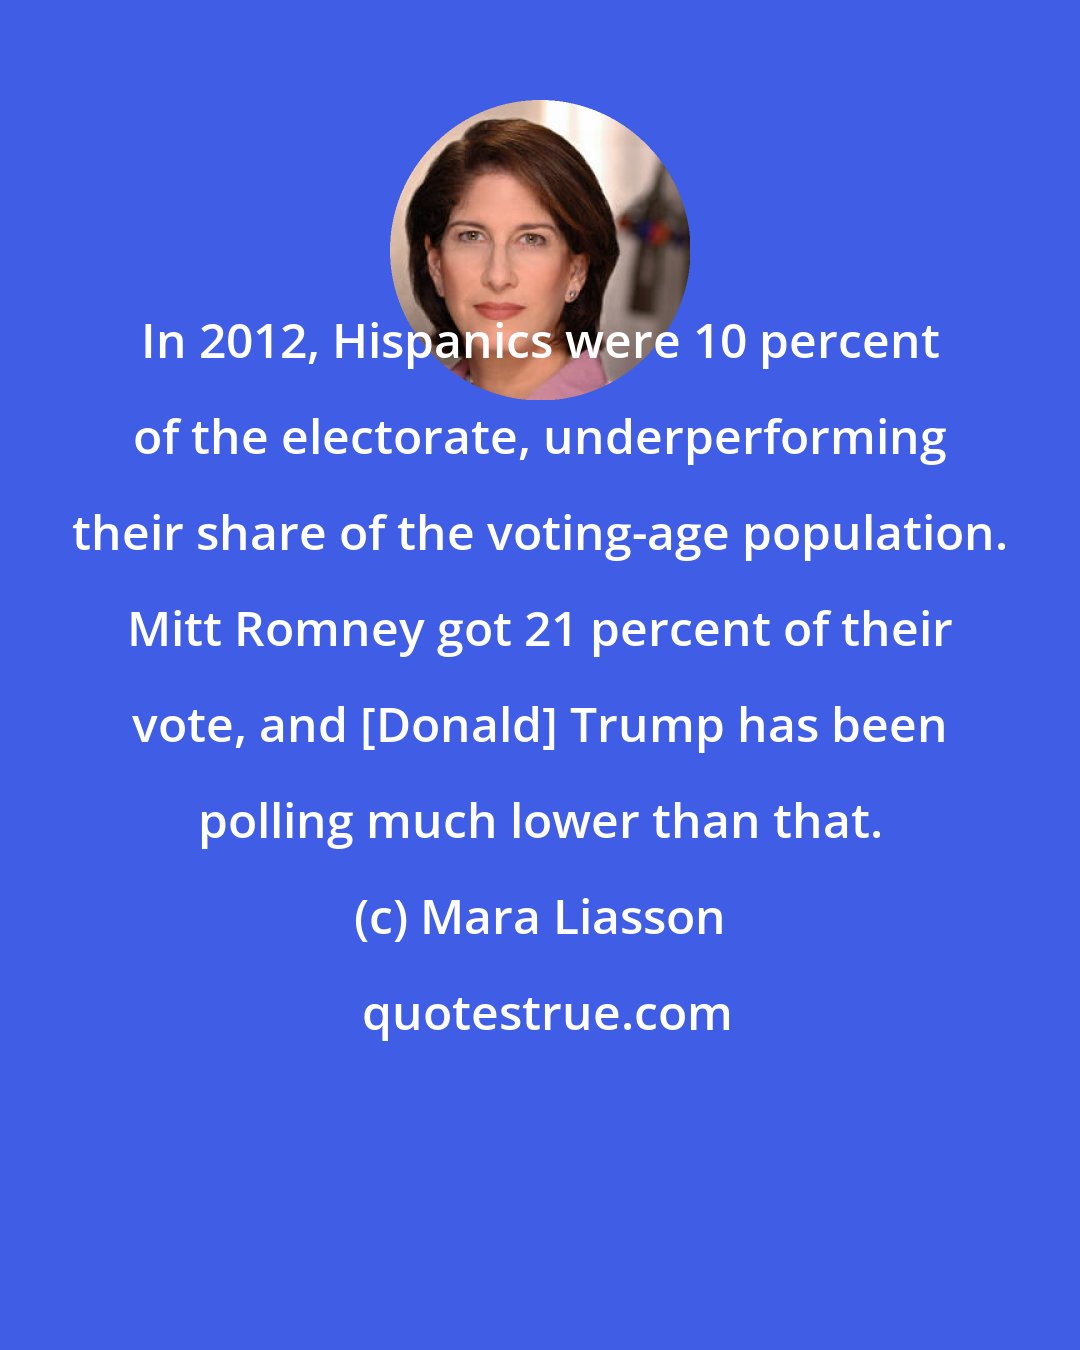 Mara Liasson: In 2012, Hispanics were 10 percent of the electorate, underperforming their share of the voting-age population. Mitt Romney got 21 percent of their vote, and [Donald] Trump has been polling much lower than that.